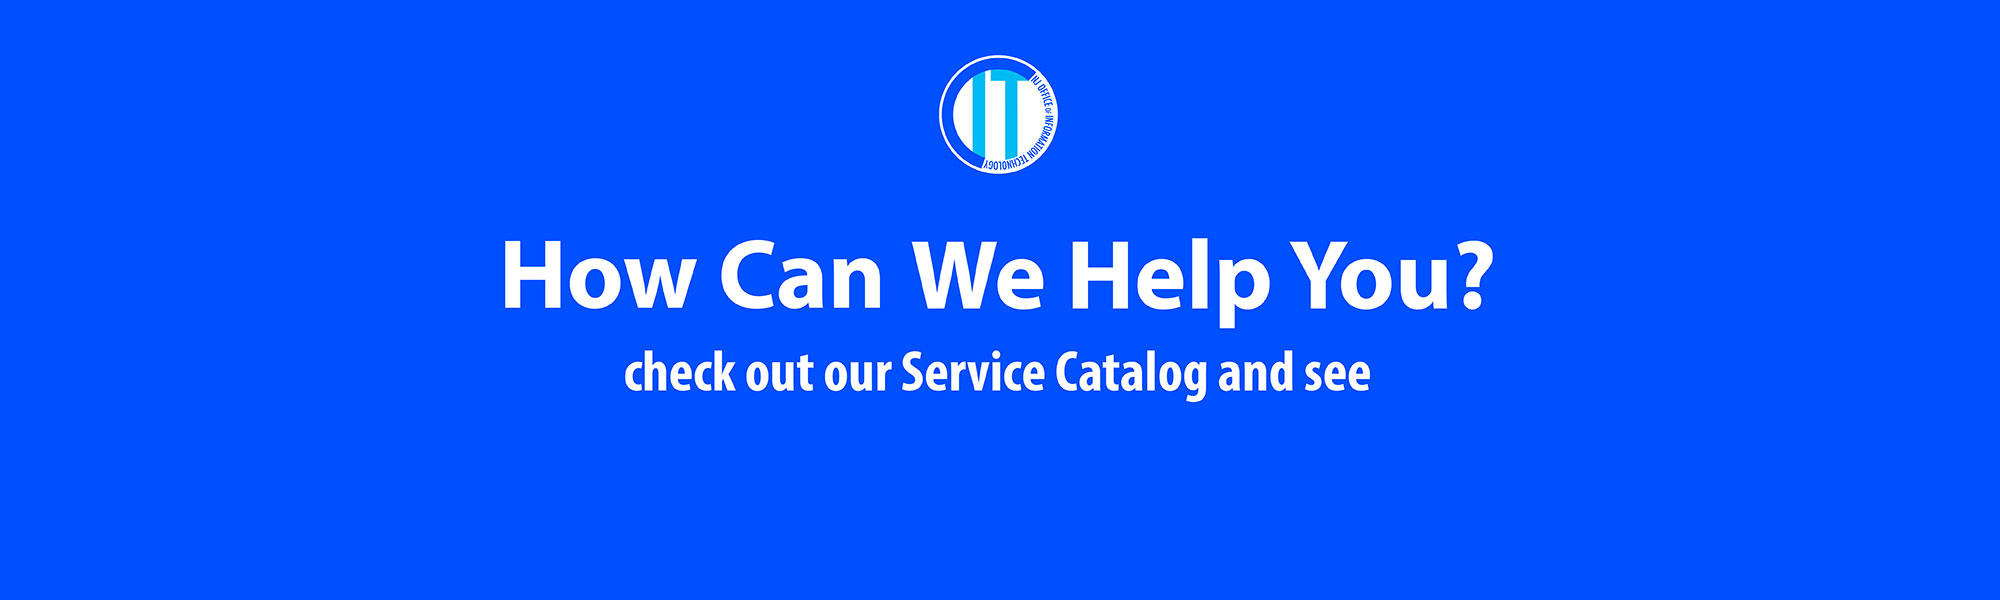 How we can help you?- Check OIT FY18 Service Catalog